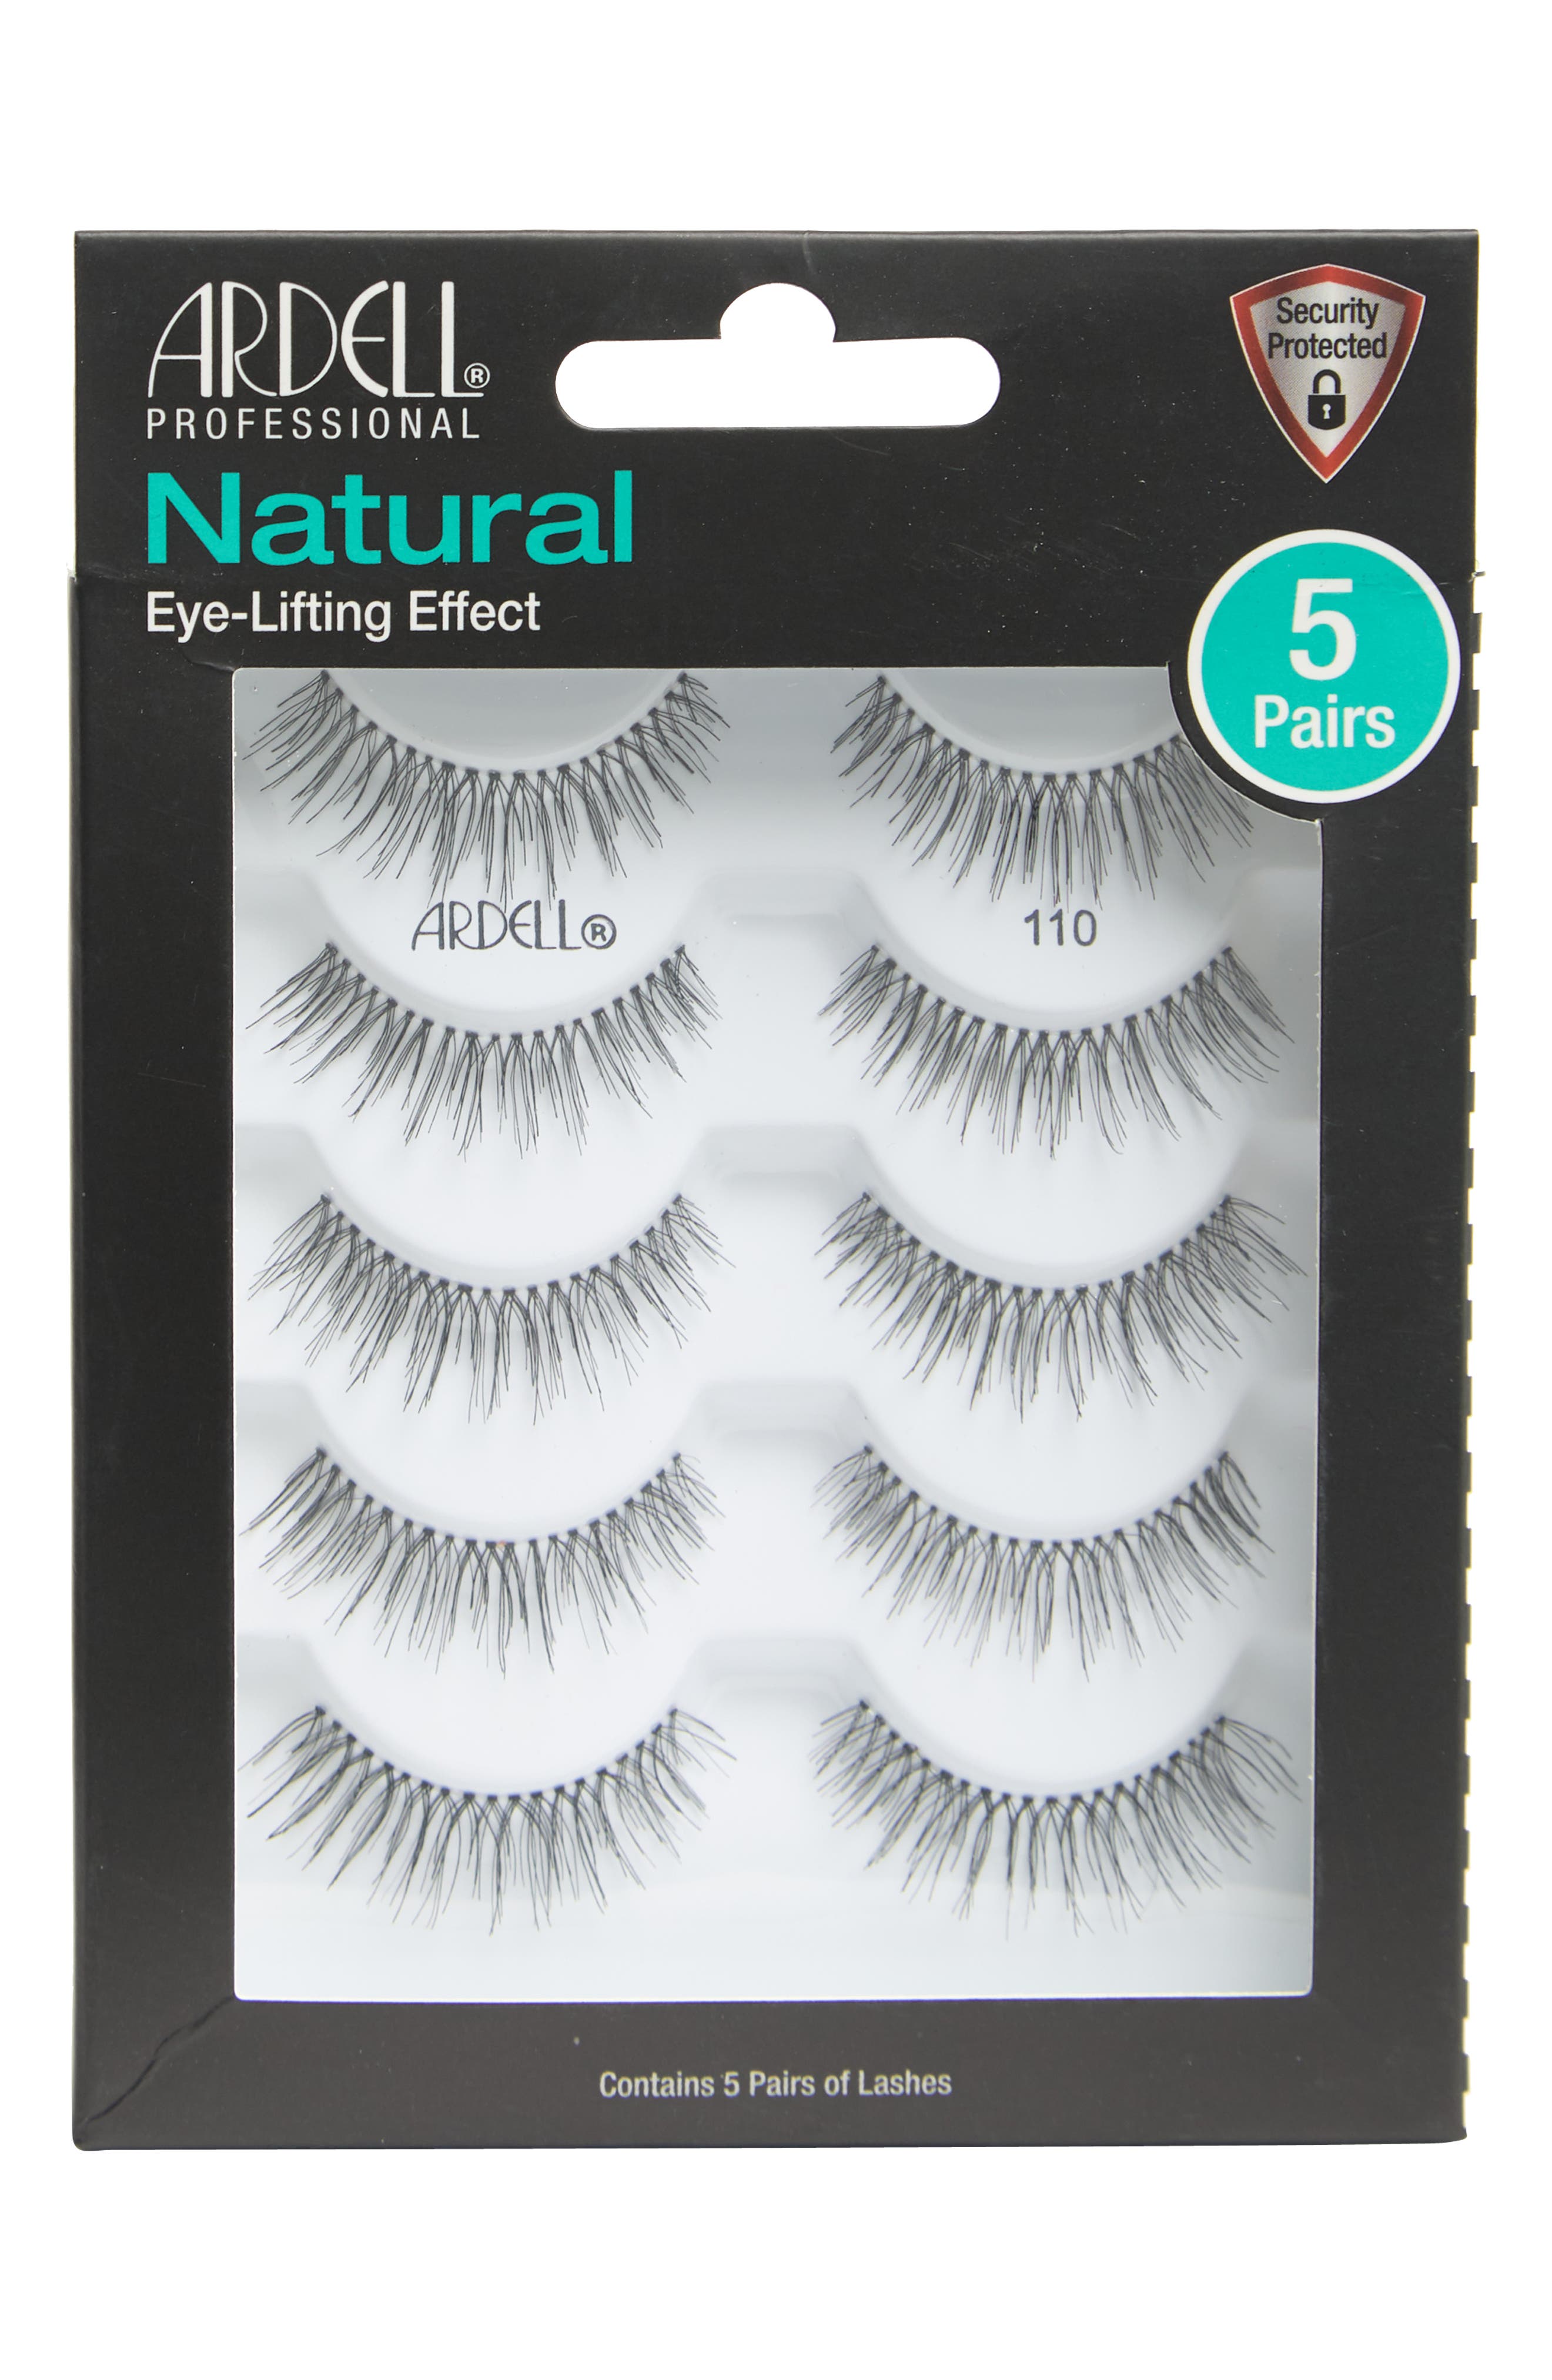 Natural 110 Lashes - Pack of 5 ARDELL